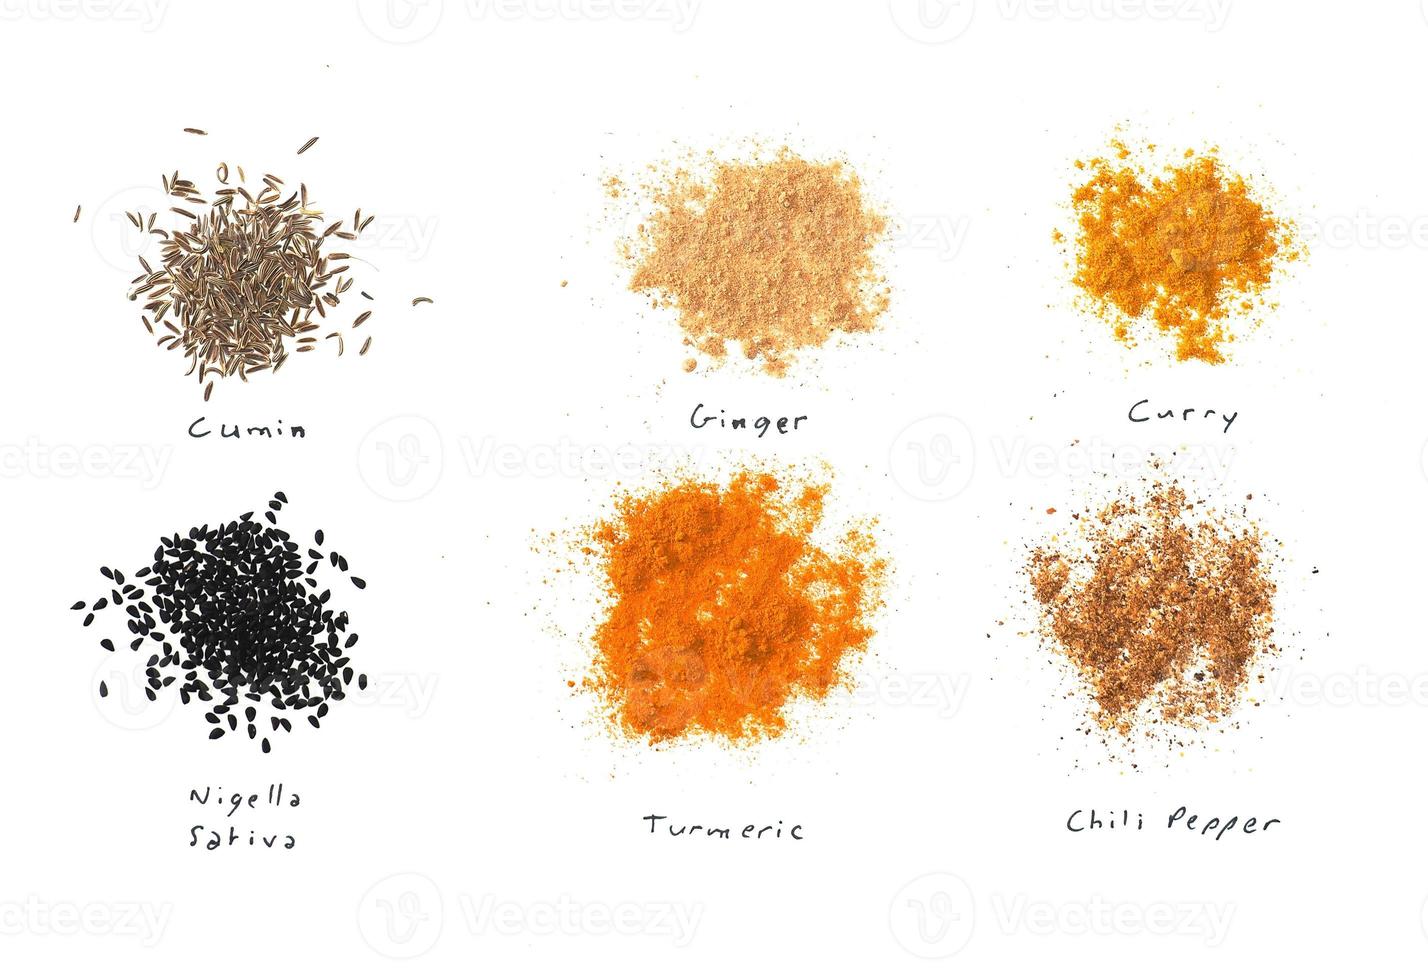 many spices including Ginger Curry Turmeric Chili pepper Black cumin Nigella sativa over white photo